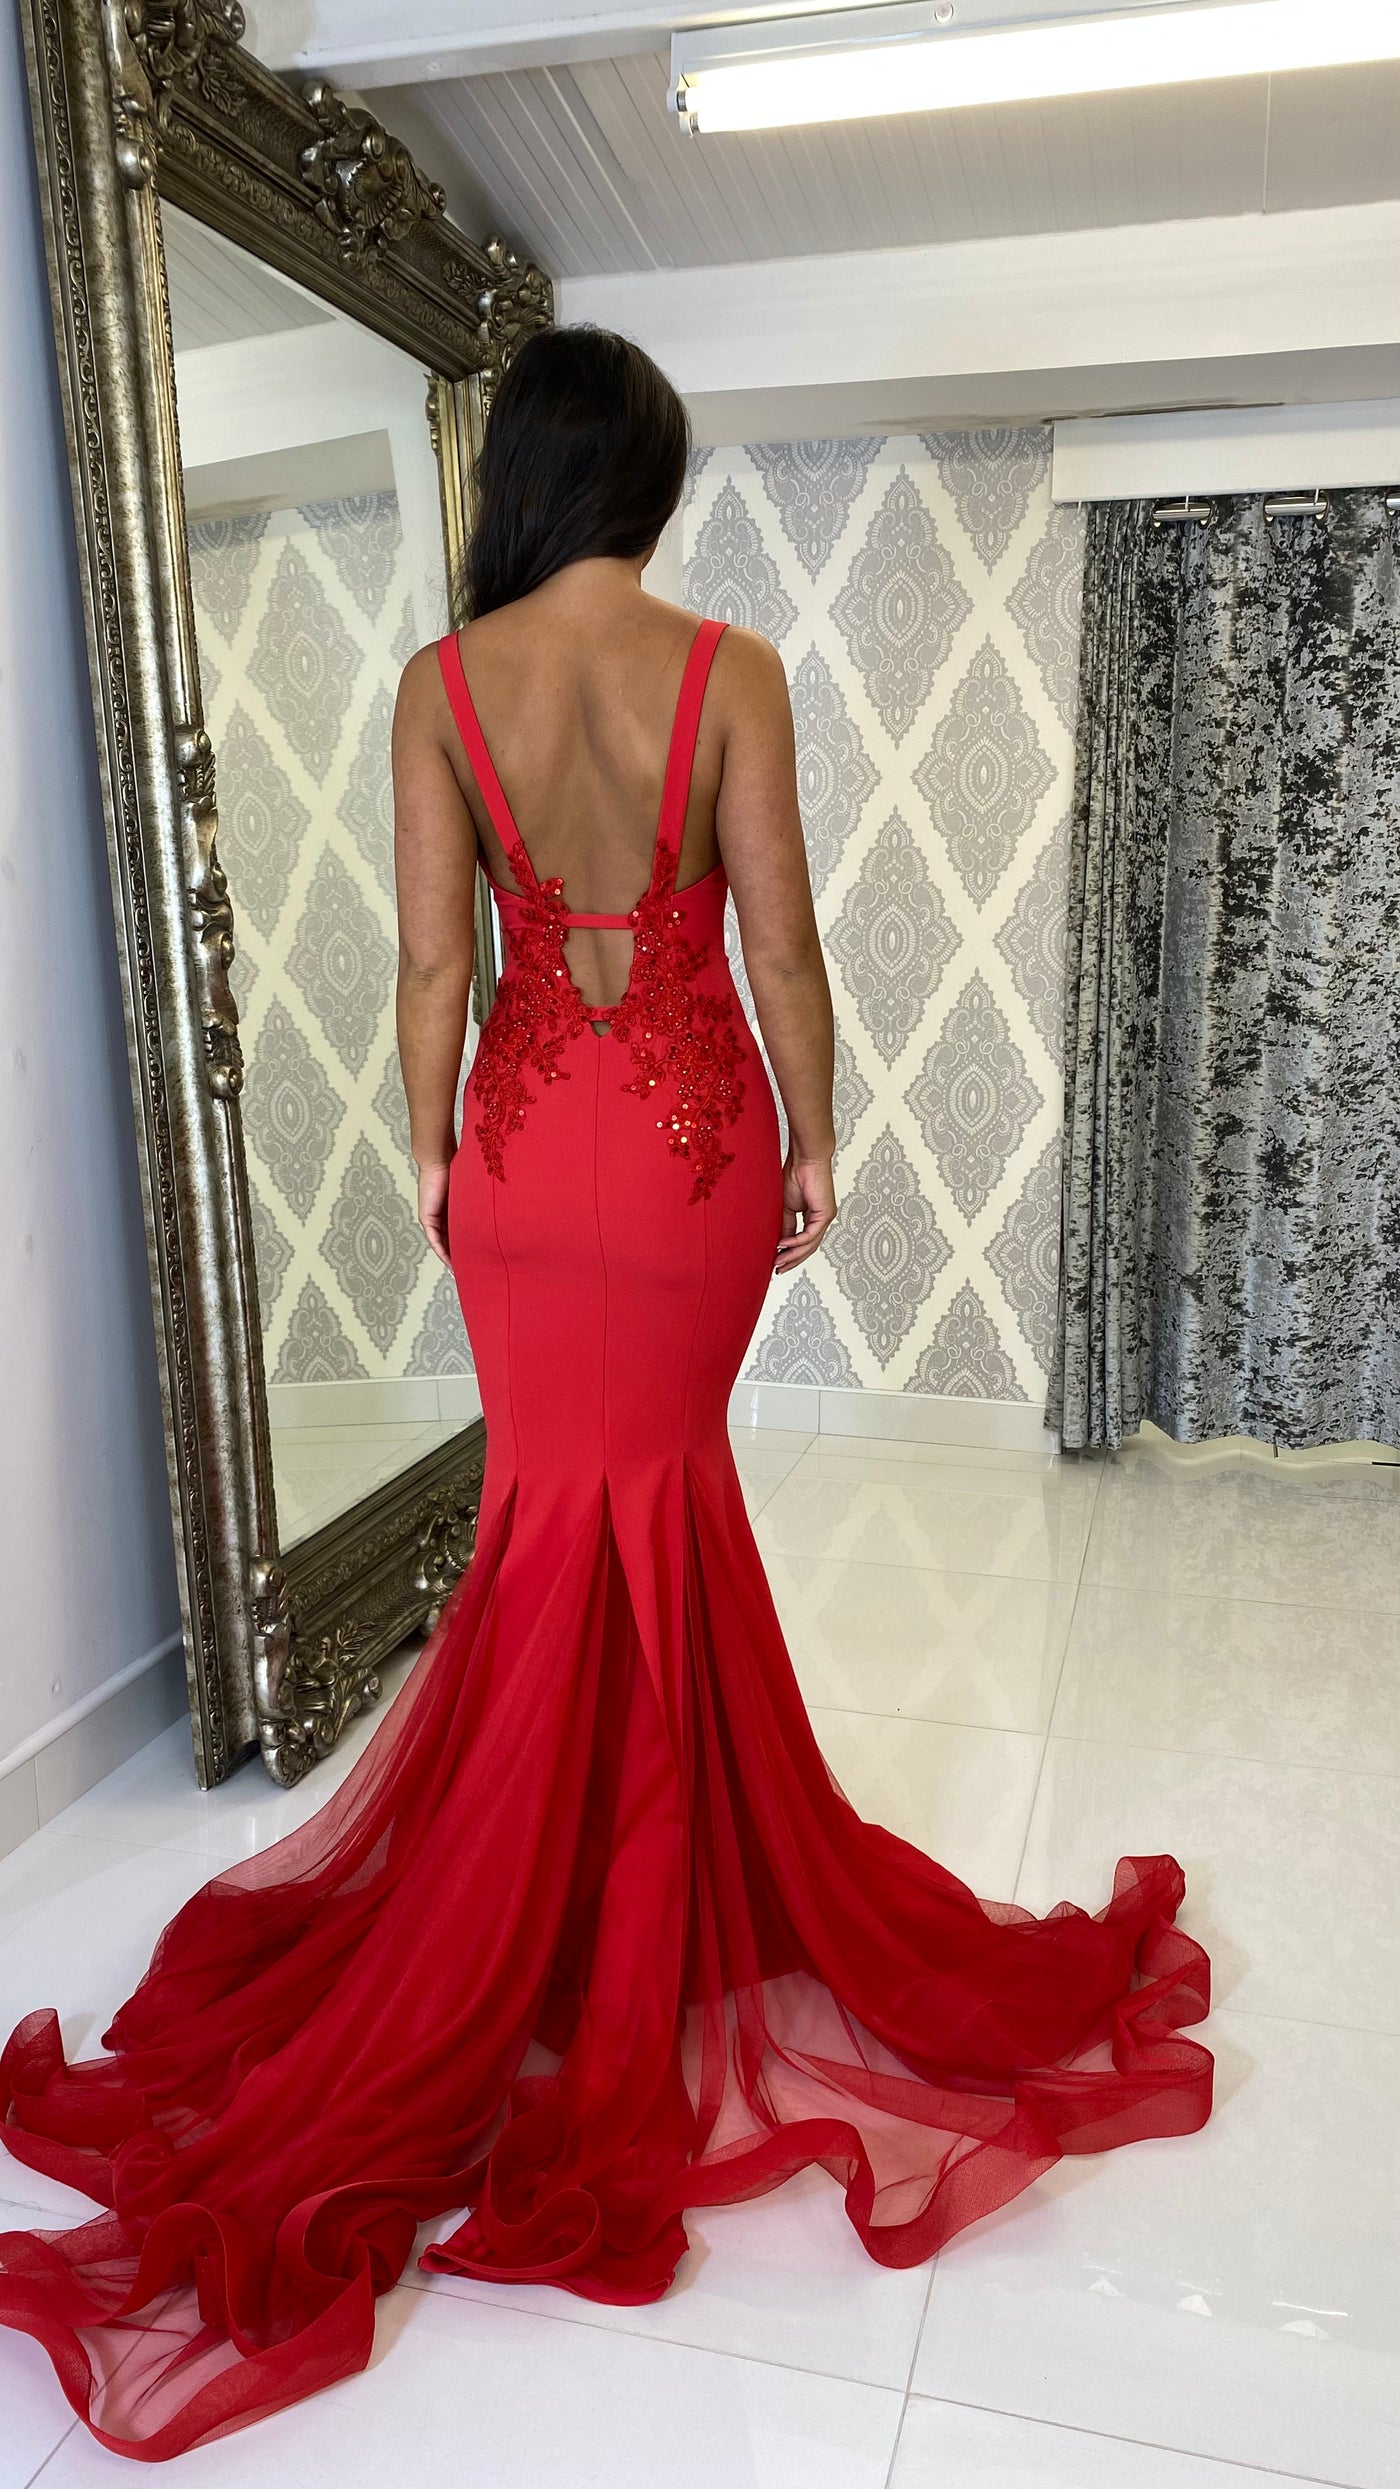 Chiffon Train Prom Dress With Plunge Neck In Red